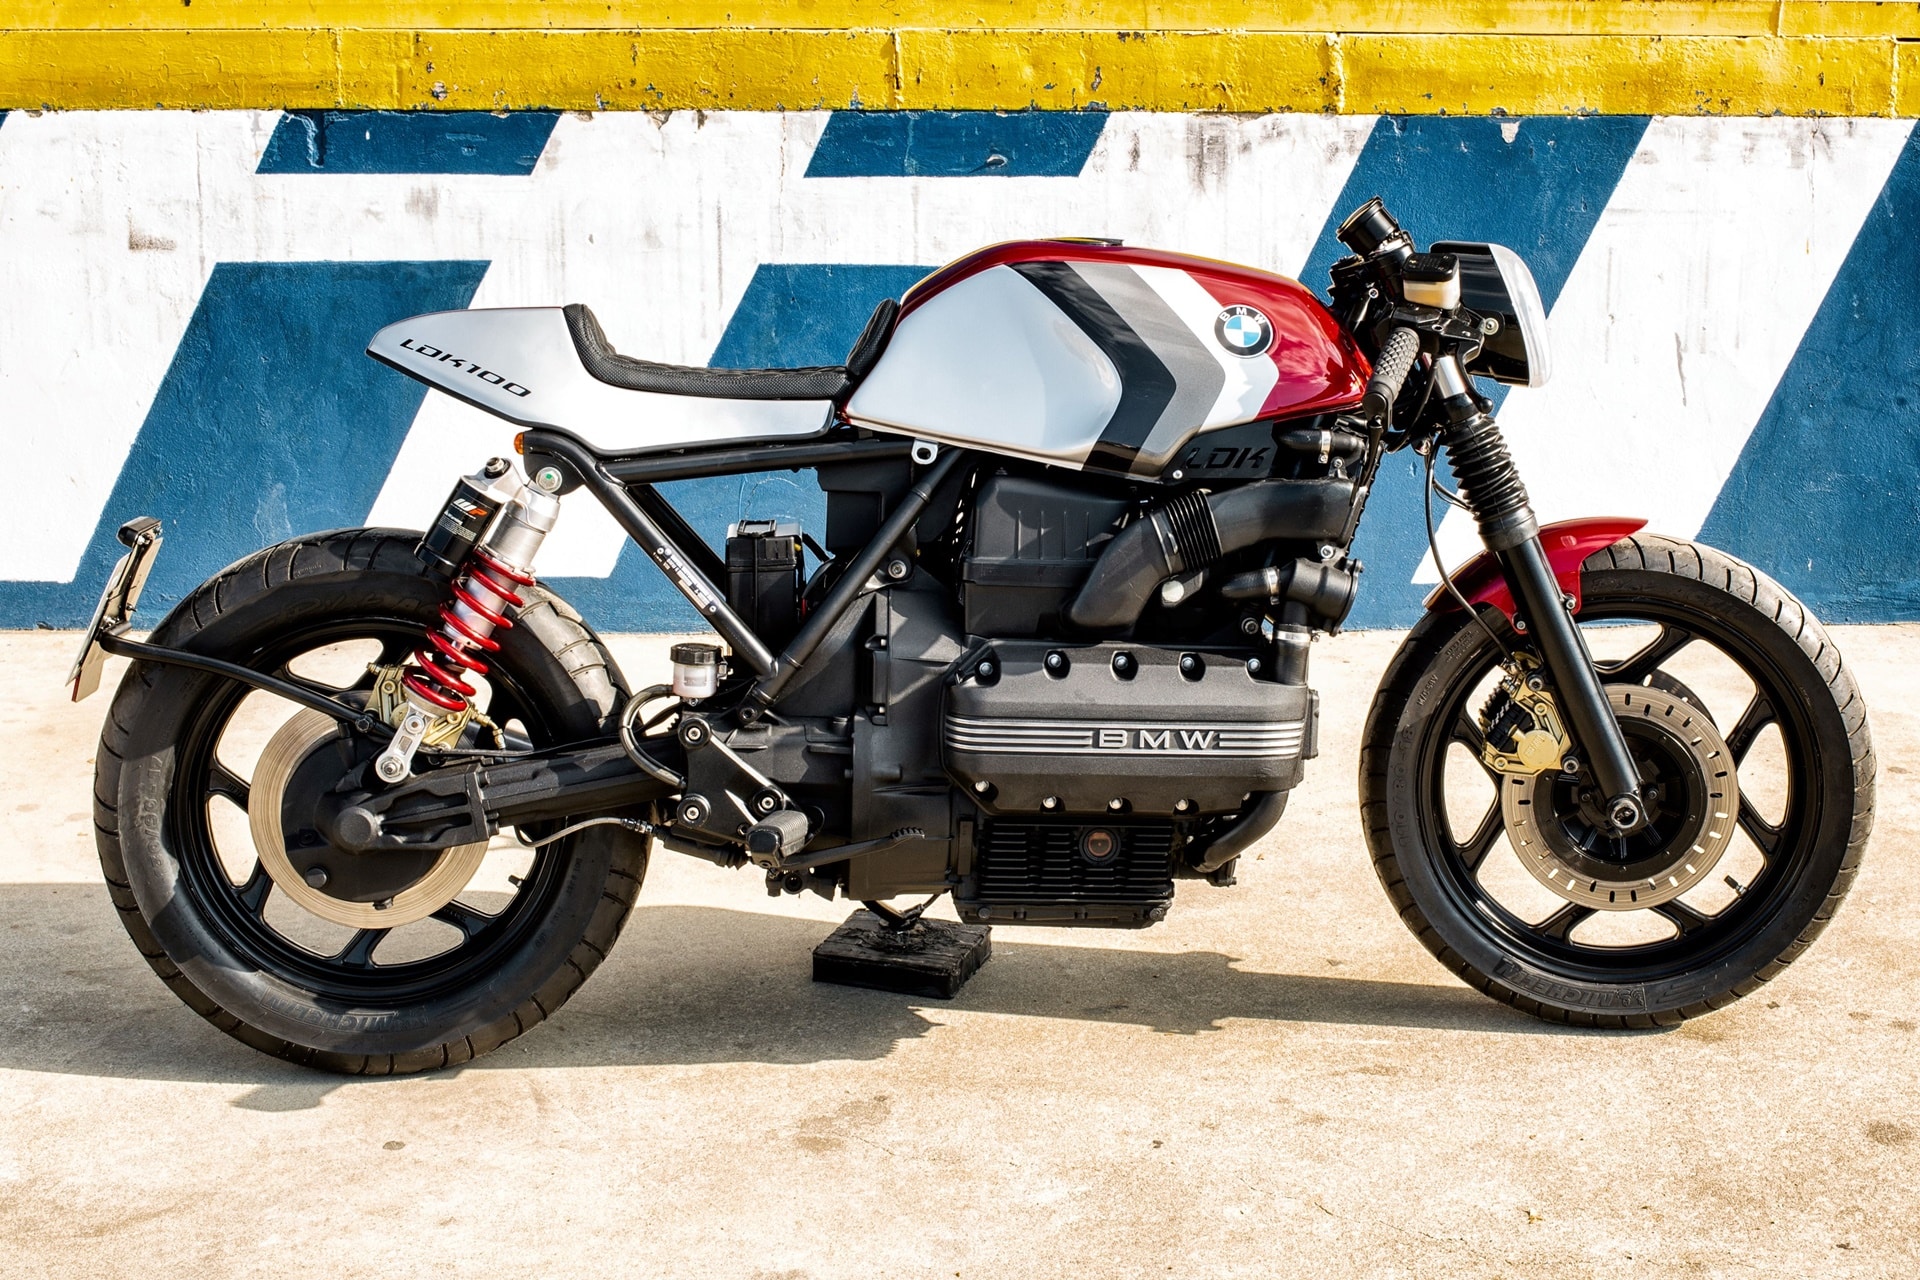 BMW K100 Racer: Deportividad con un toque racing "by Lord Drake Kustoms"